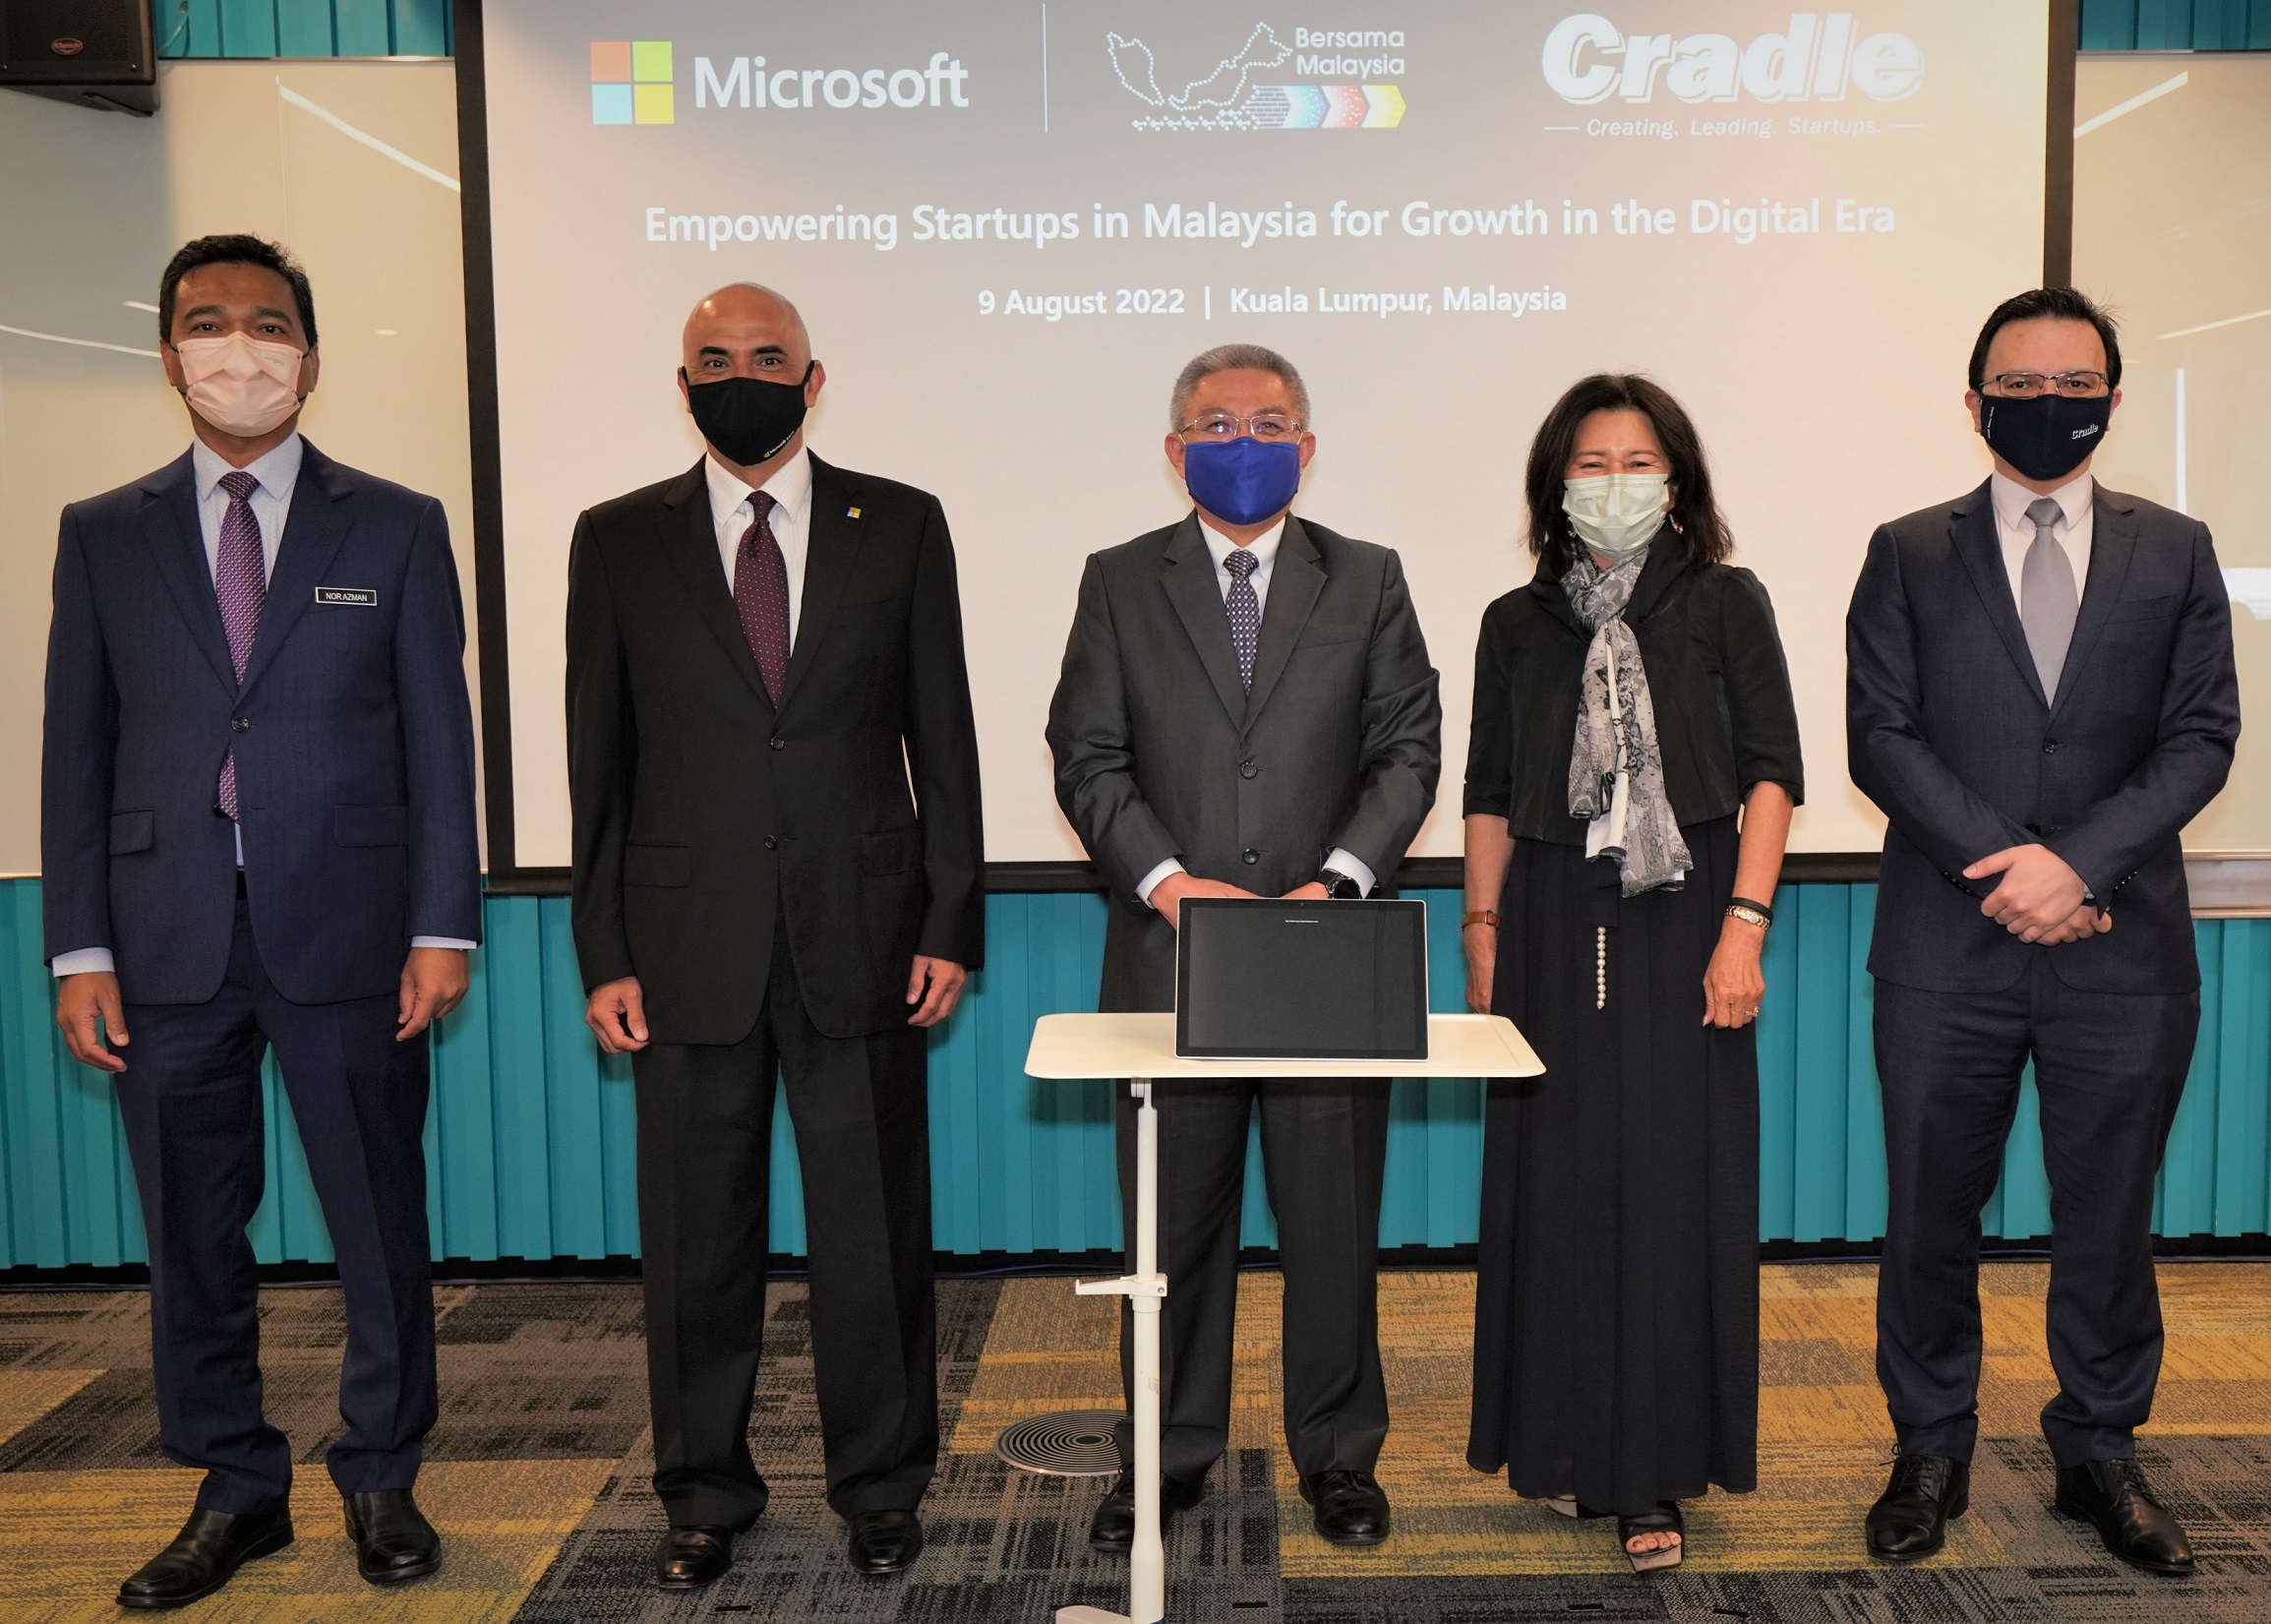 (L2R) Mohd Nor Azman Hassan, deputy Sec-Gen (Technology Development) Ministry of Science, Technology & Innovation; K Raman, MD Microsoft Malaysia; Adham Baba, minister of Science, Technology & Innovation; Yvonne Chia, chairman Cradle & Norman Matthieu, acting CEO Cradle at the MOU signing